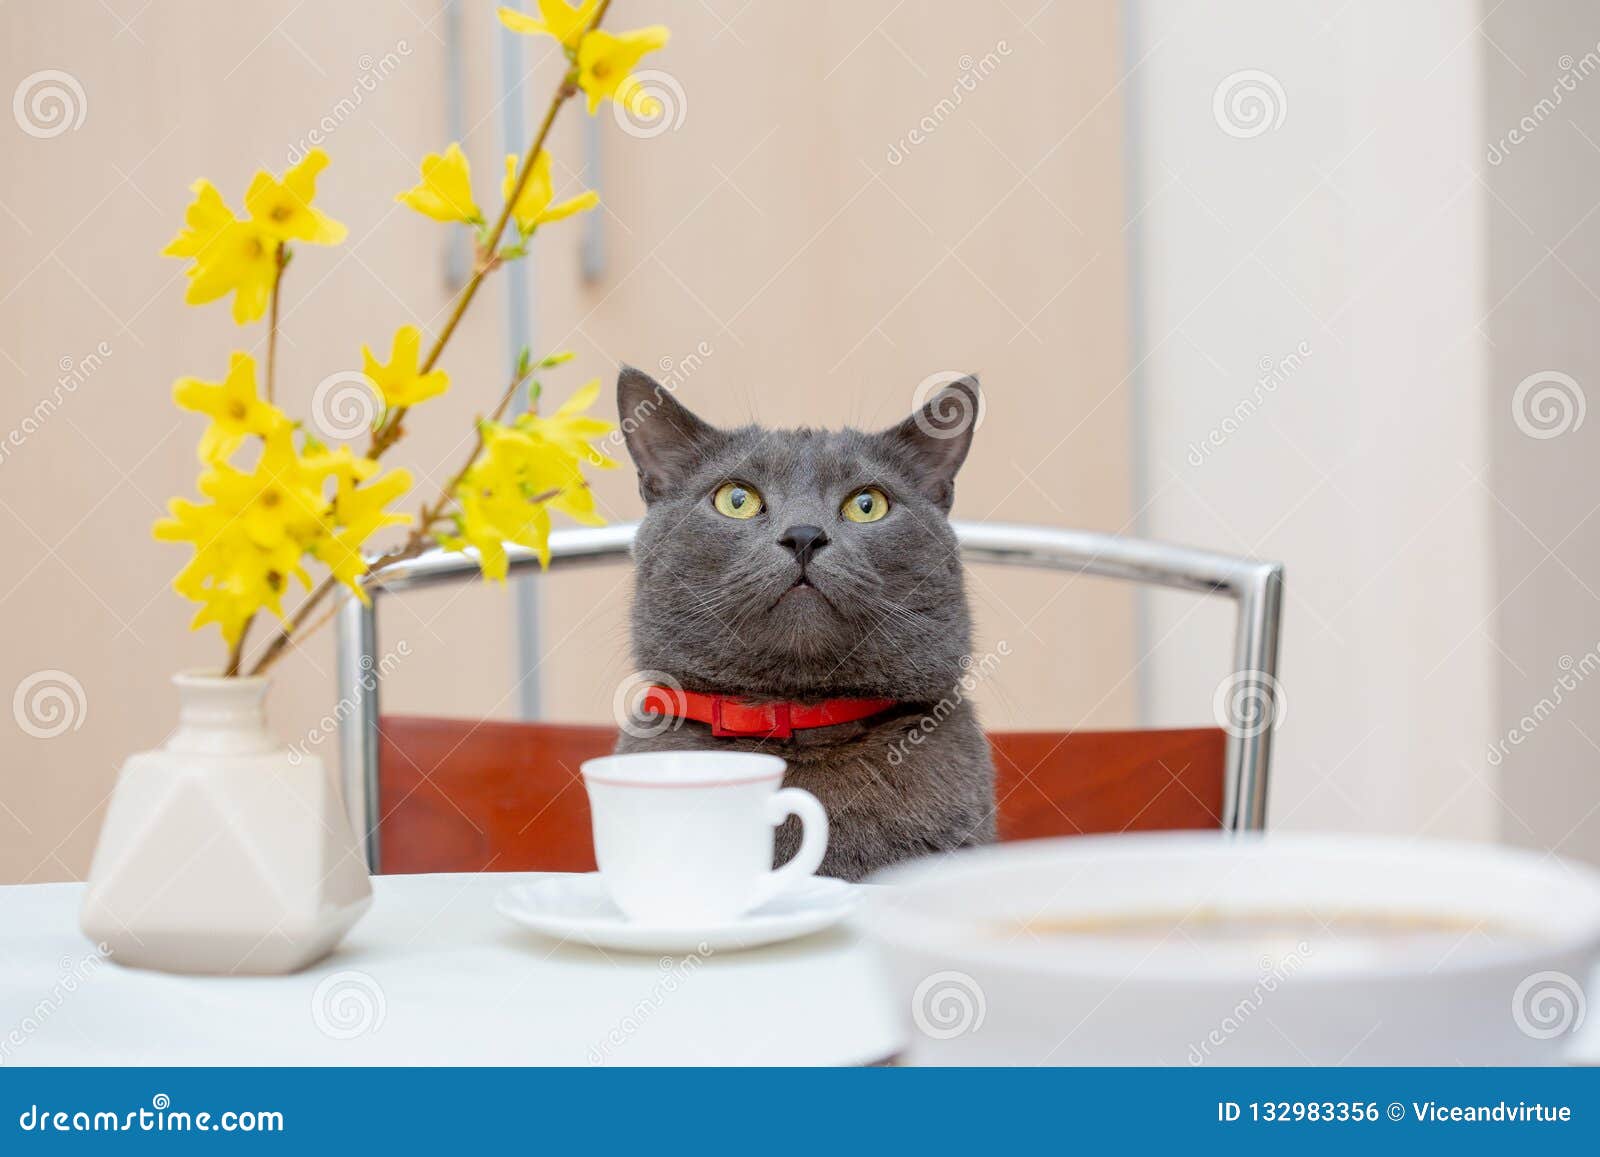 Drinking Tea Together With Adorable Grey Cat Stock Photo 